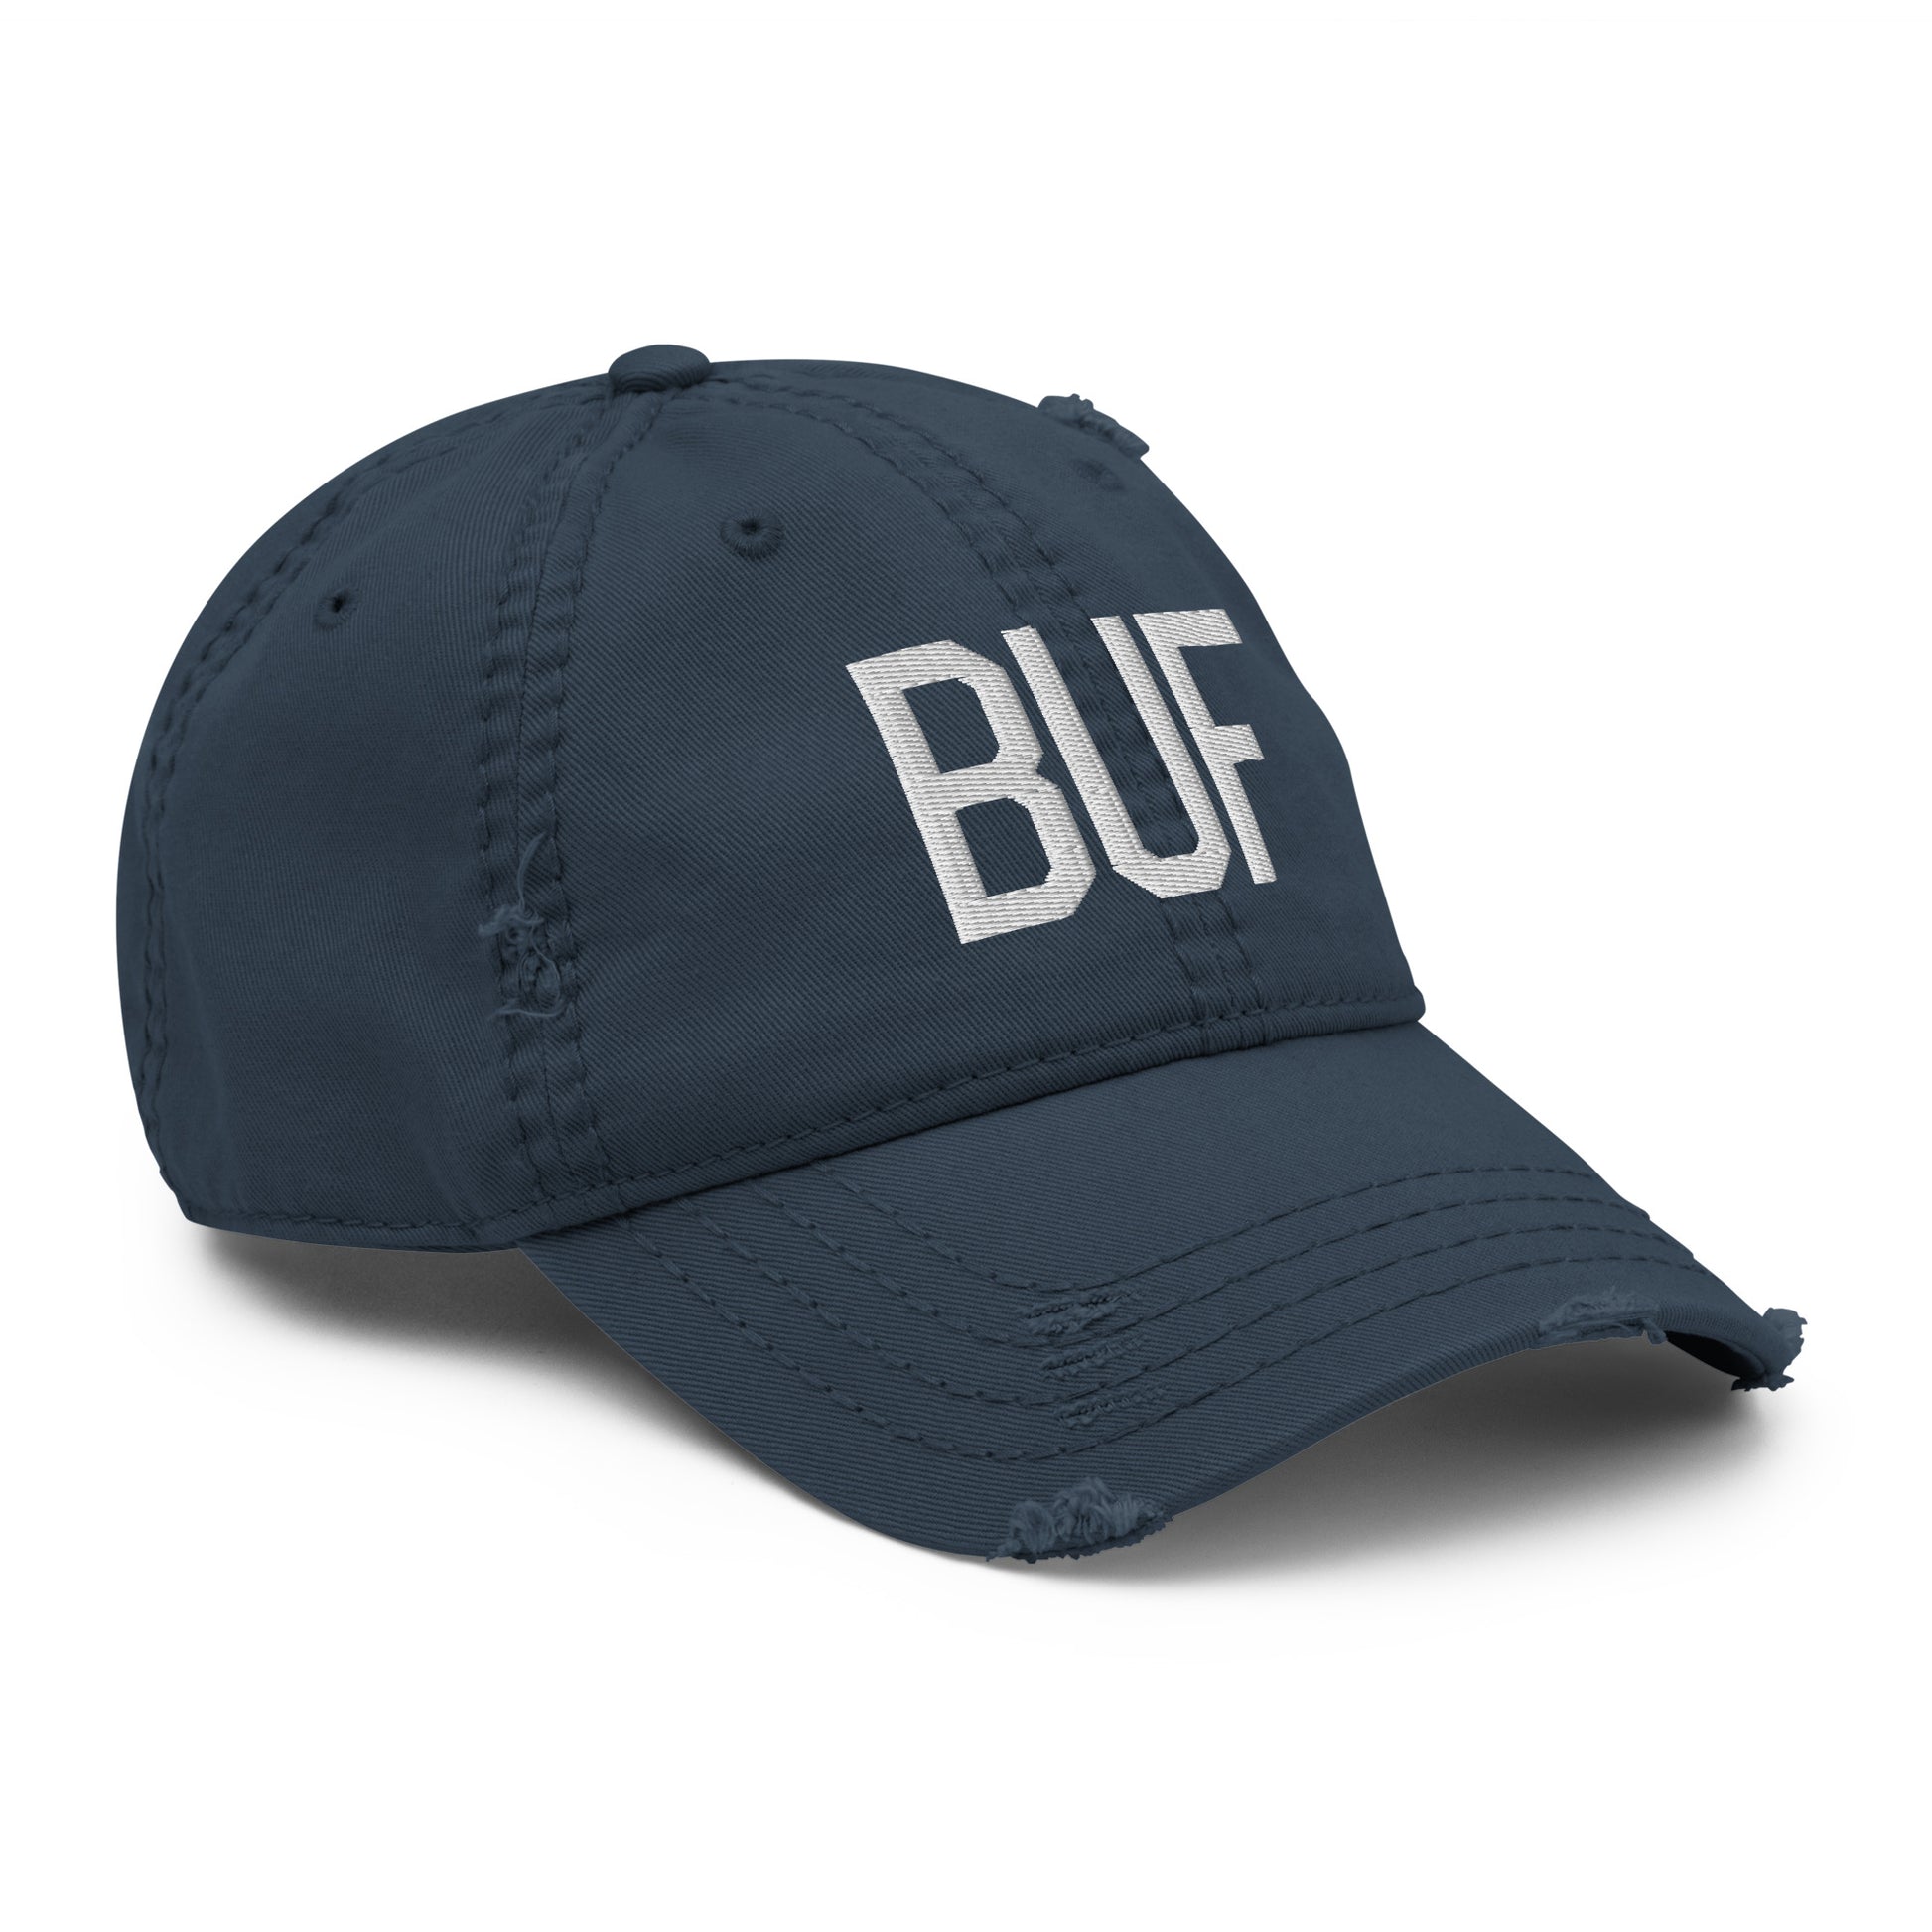 Airport Code Distressed Hat - White • BUF Buffalo • YHM Designs - Image 14